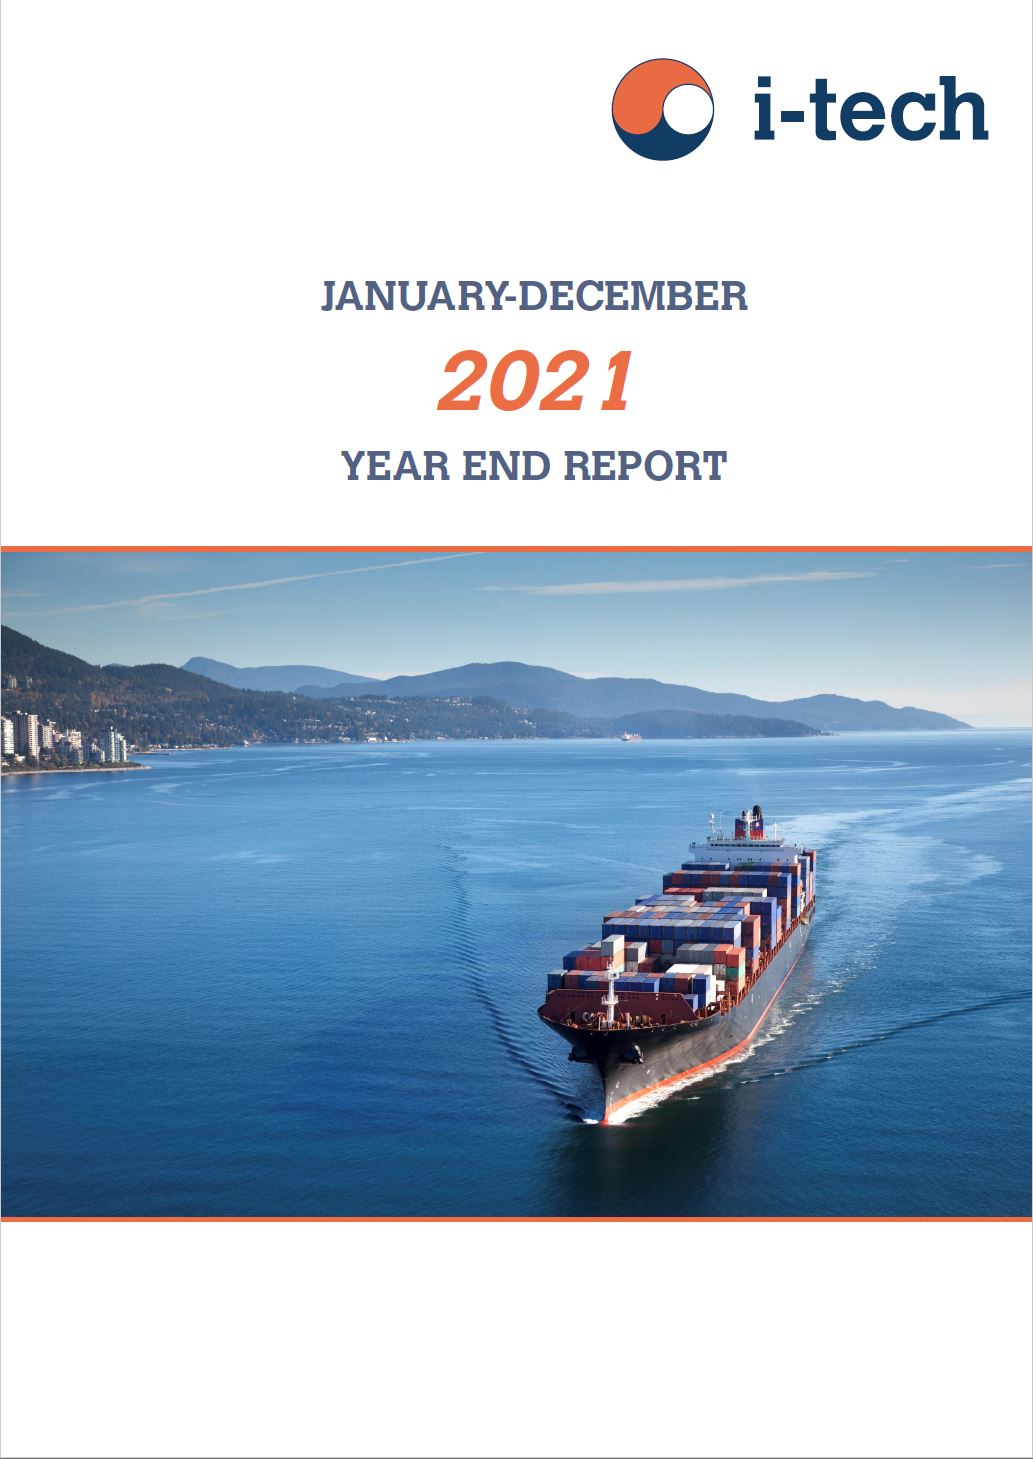 Year end Report 2021